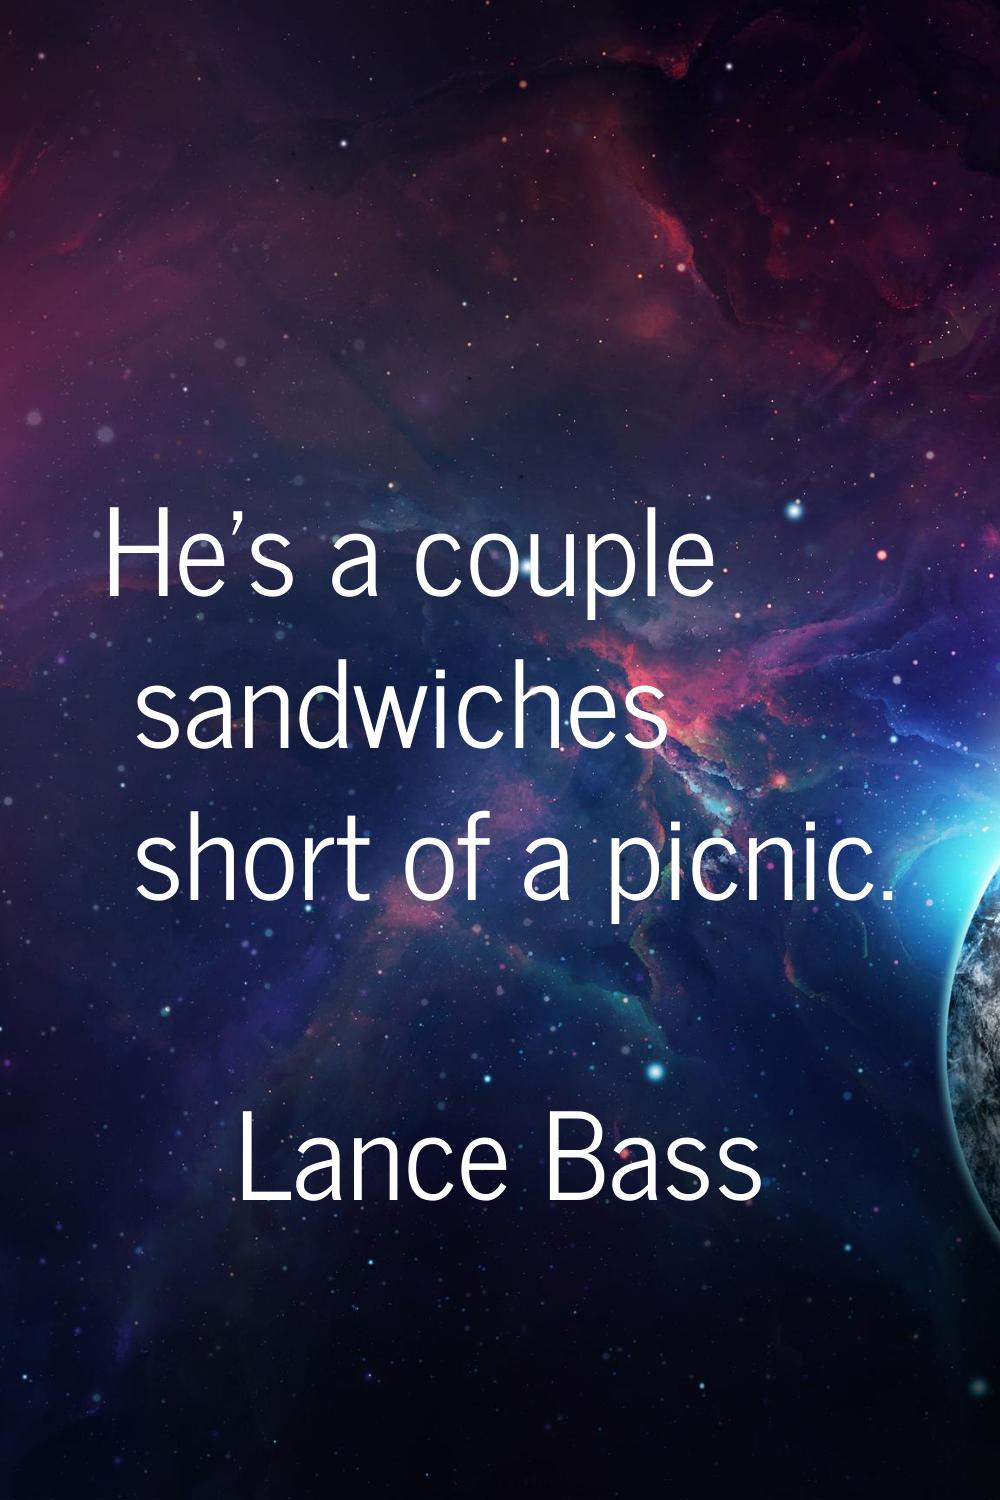 He's a couple sandwiches short of a picnic.